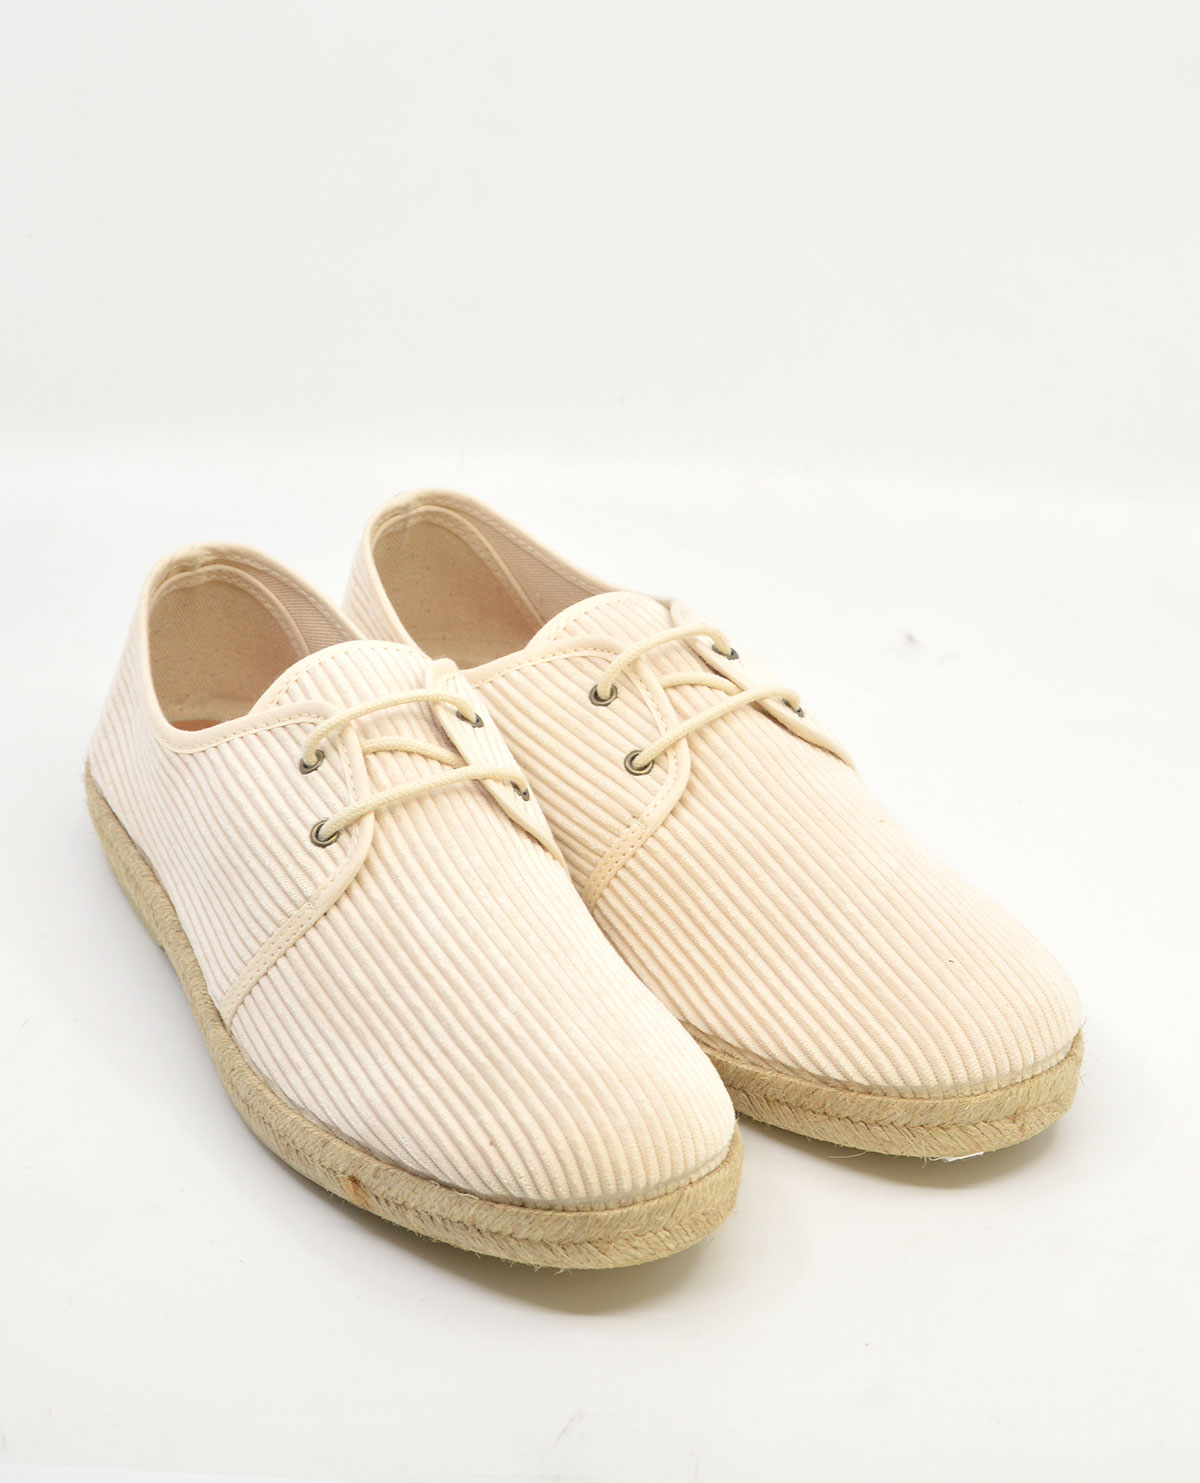 The Cortez In Cream Cord (Corded) – Summer Shoes – Mod Shoes